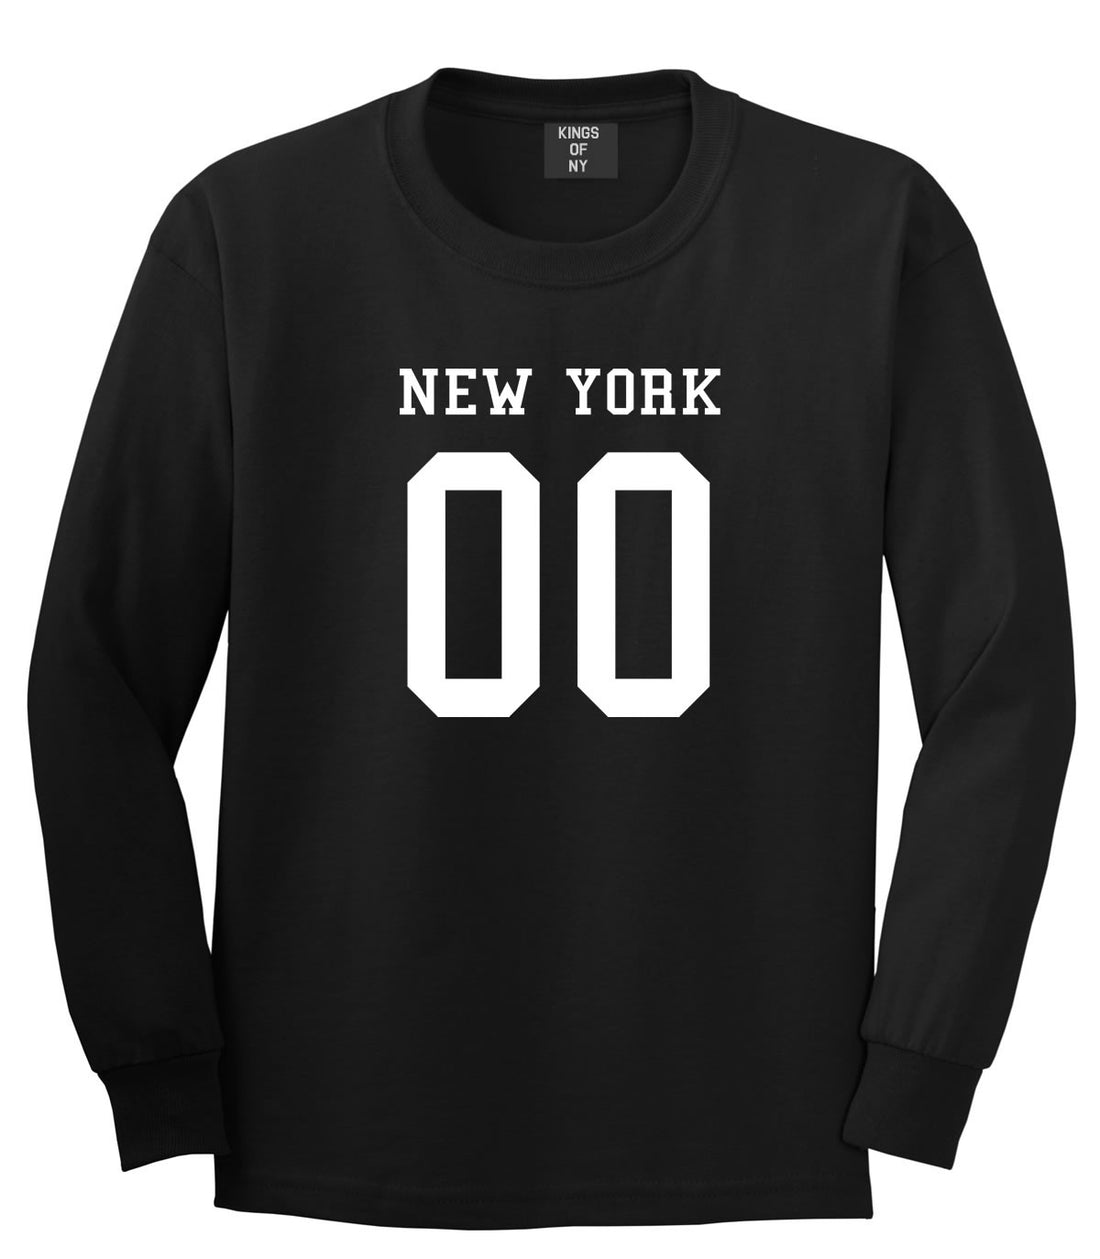 New York Team 00 Jersey Long Sleeve T-Shirt in Black By Kings Of NY